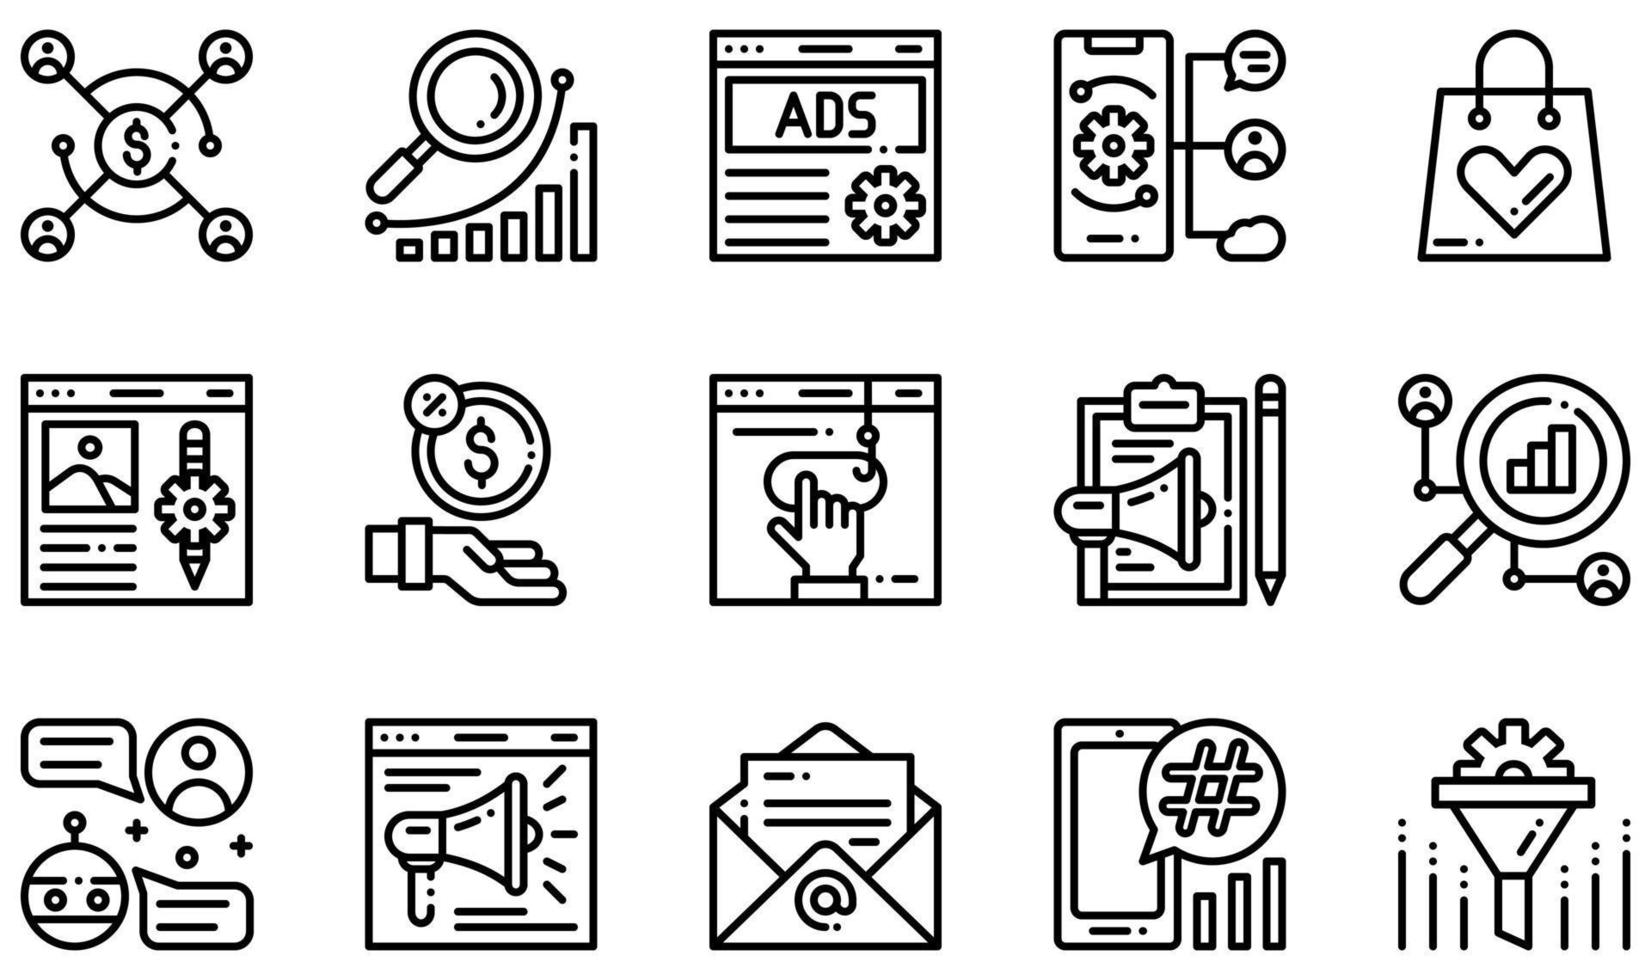 Set of Vector Icons Related to Digital Marketing. Contains such Icons as Affiliate Marketing, Advertising, Blog, Commission, Clickbait, Content Marketing and more.